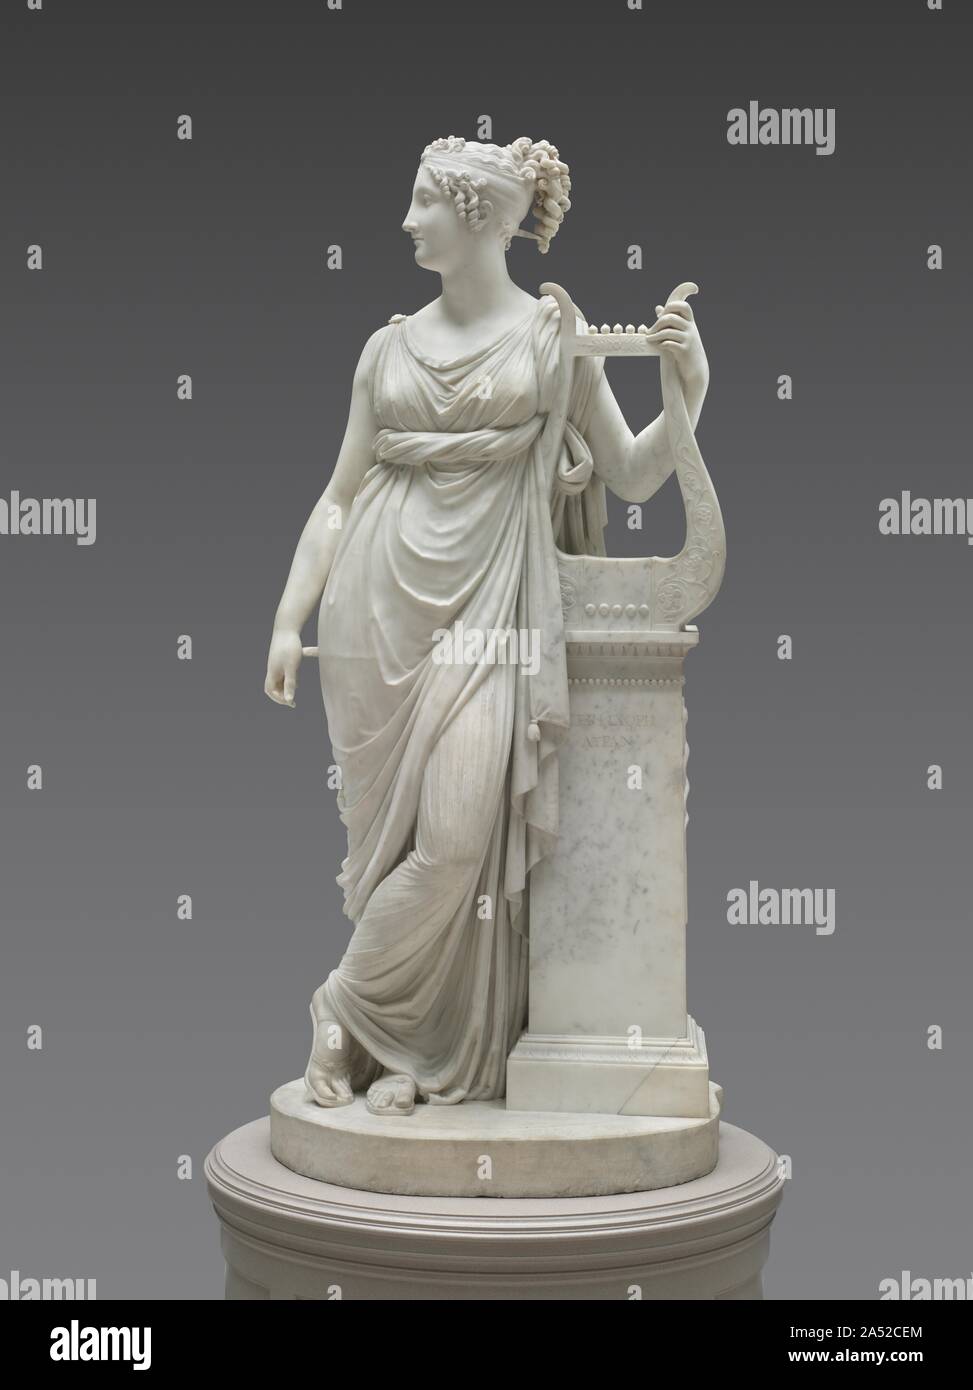 Terpsichore Lyran (Muse of Lyric Poetry), 1816. In Greek mythology, Terpsichore was one of the nine Muses, or goddesses of creative inspiration. The lyre, the Greek inscription on the short column, and the caduceus (entwined snakes) on the side identify the figure as Terpsichore Lyran, muse of lyric poetry. This sculpture began with a commission from Napoleon's brother, Lucien, for an idealized portrait of his wife, Alexandrine. Antonio Canova made this version for a British aristocrat and exhibited it in 1817 at the Royal Academy in London to great acclaim. Stock Photo